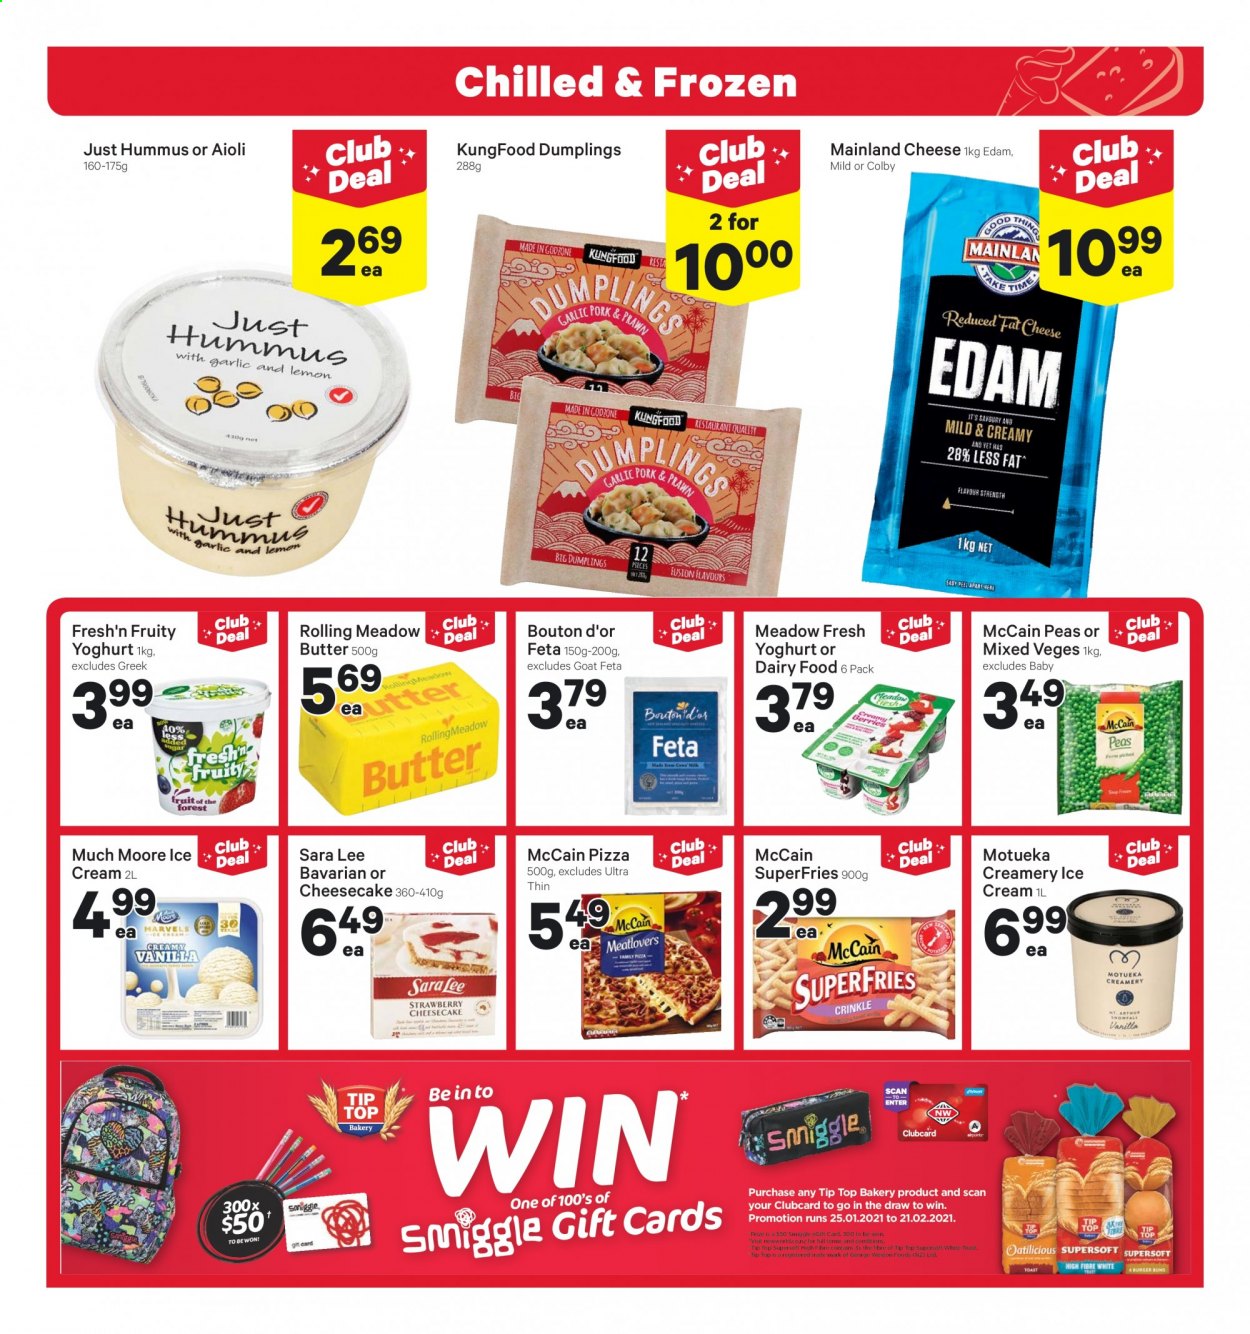 thumbnail - New World mailer - 25.01.2021 - 31.01.2021 - Sales products - toast bread, Sara Lee, cheesecake, peas, pizza, dumplings, hummus, Colby cheese, edam cheese, cheese, feta, yoghurt, Fresh'n Fruity, butter, ice cream, Much Moore, McCain. Page 11.